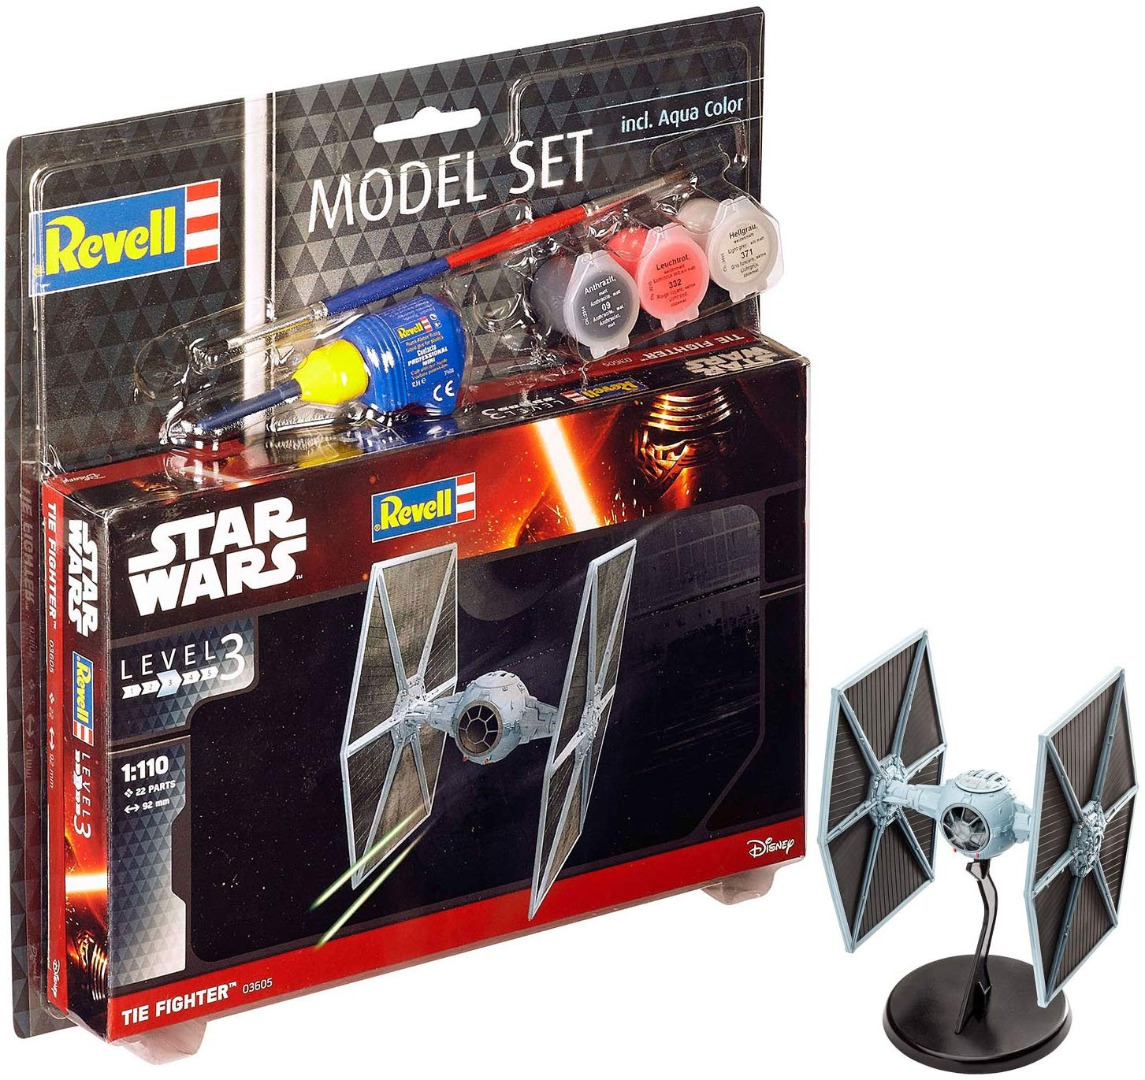 Revell Model Set Tie Fighter Scale 1:110